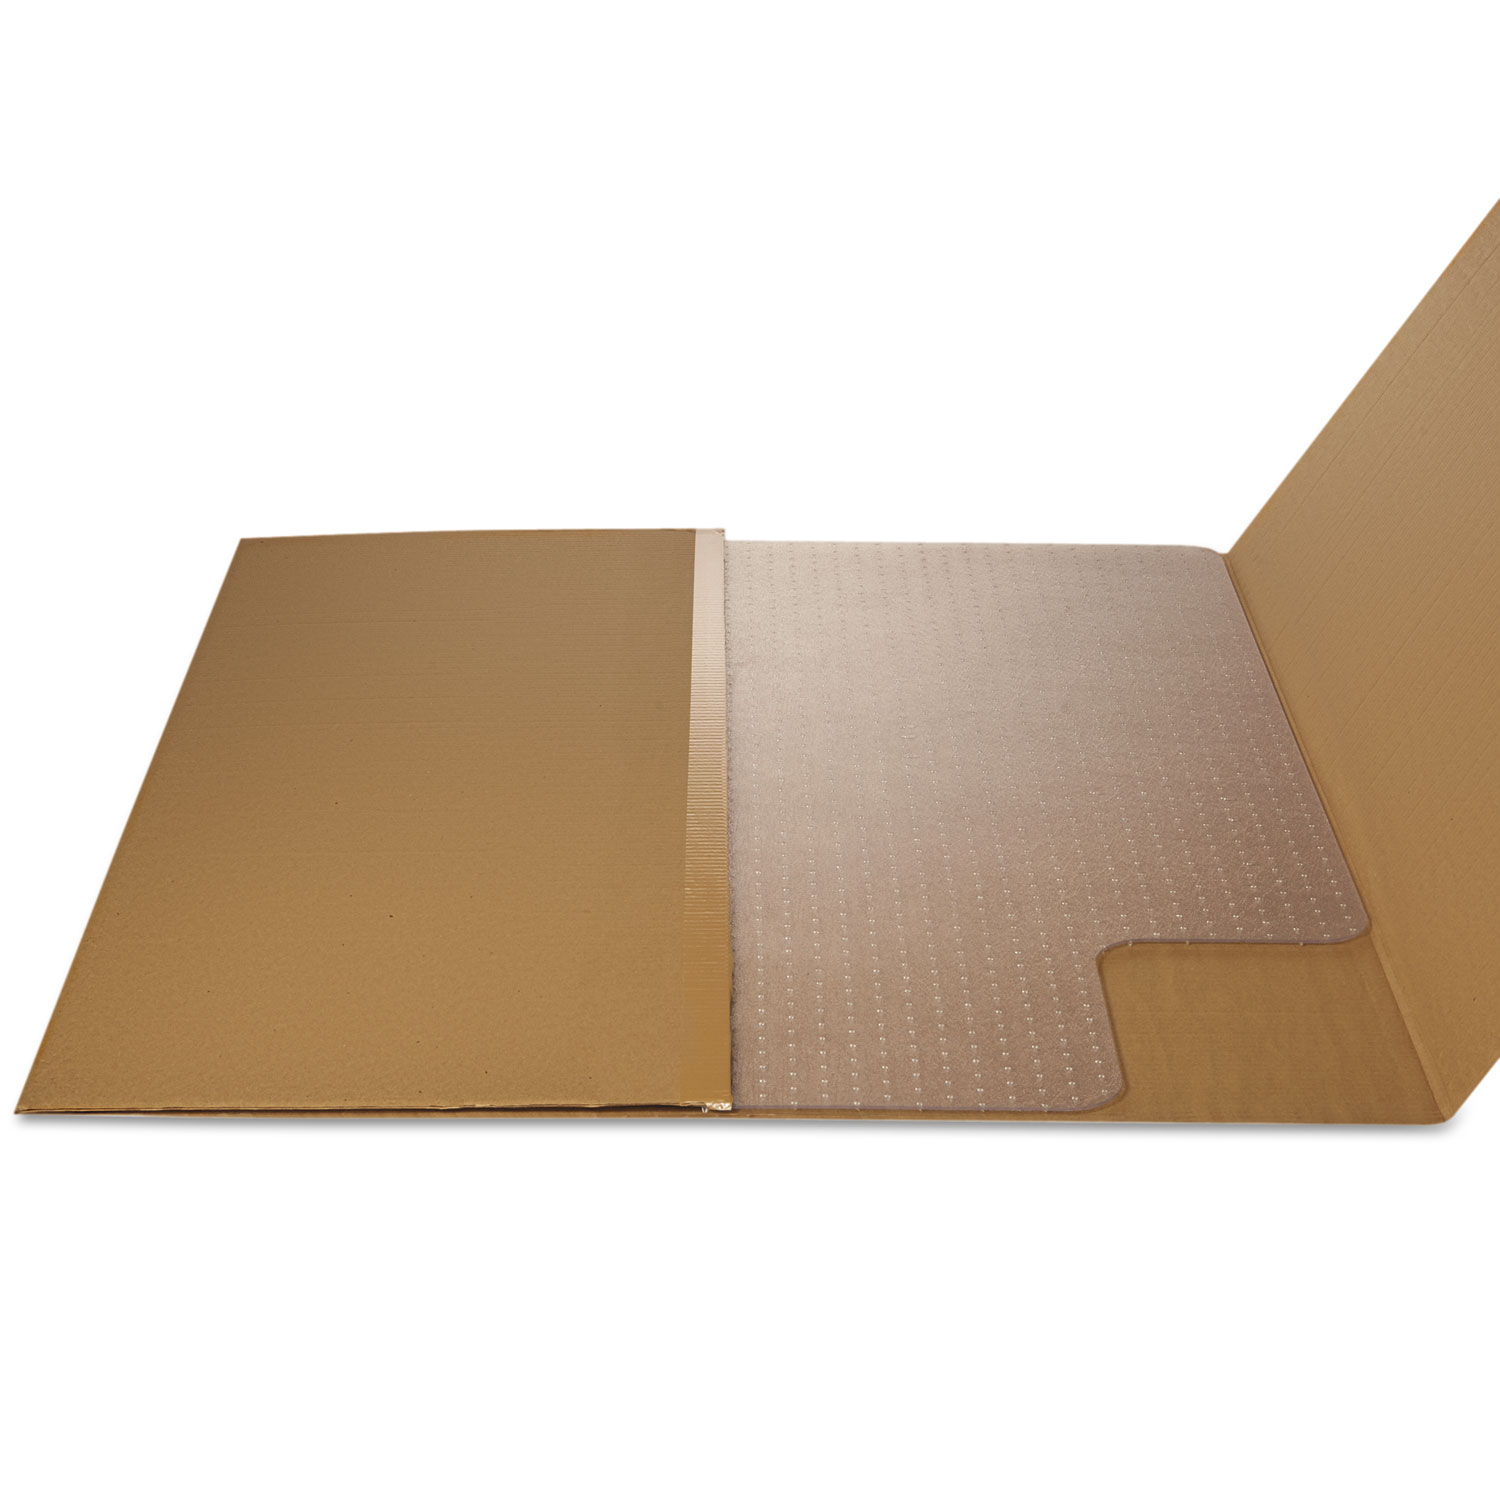 EconoMat Occasional Use Chair Mat for Low Pile, 45 x 53 w/Lip, Clear